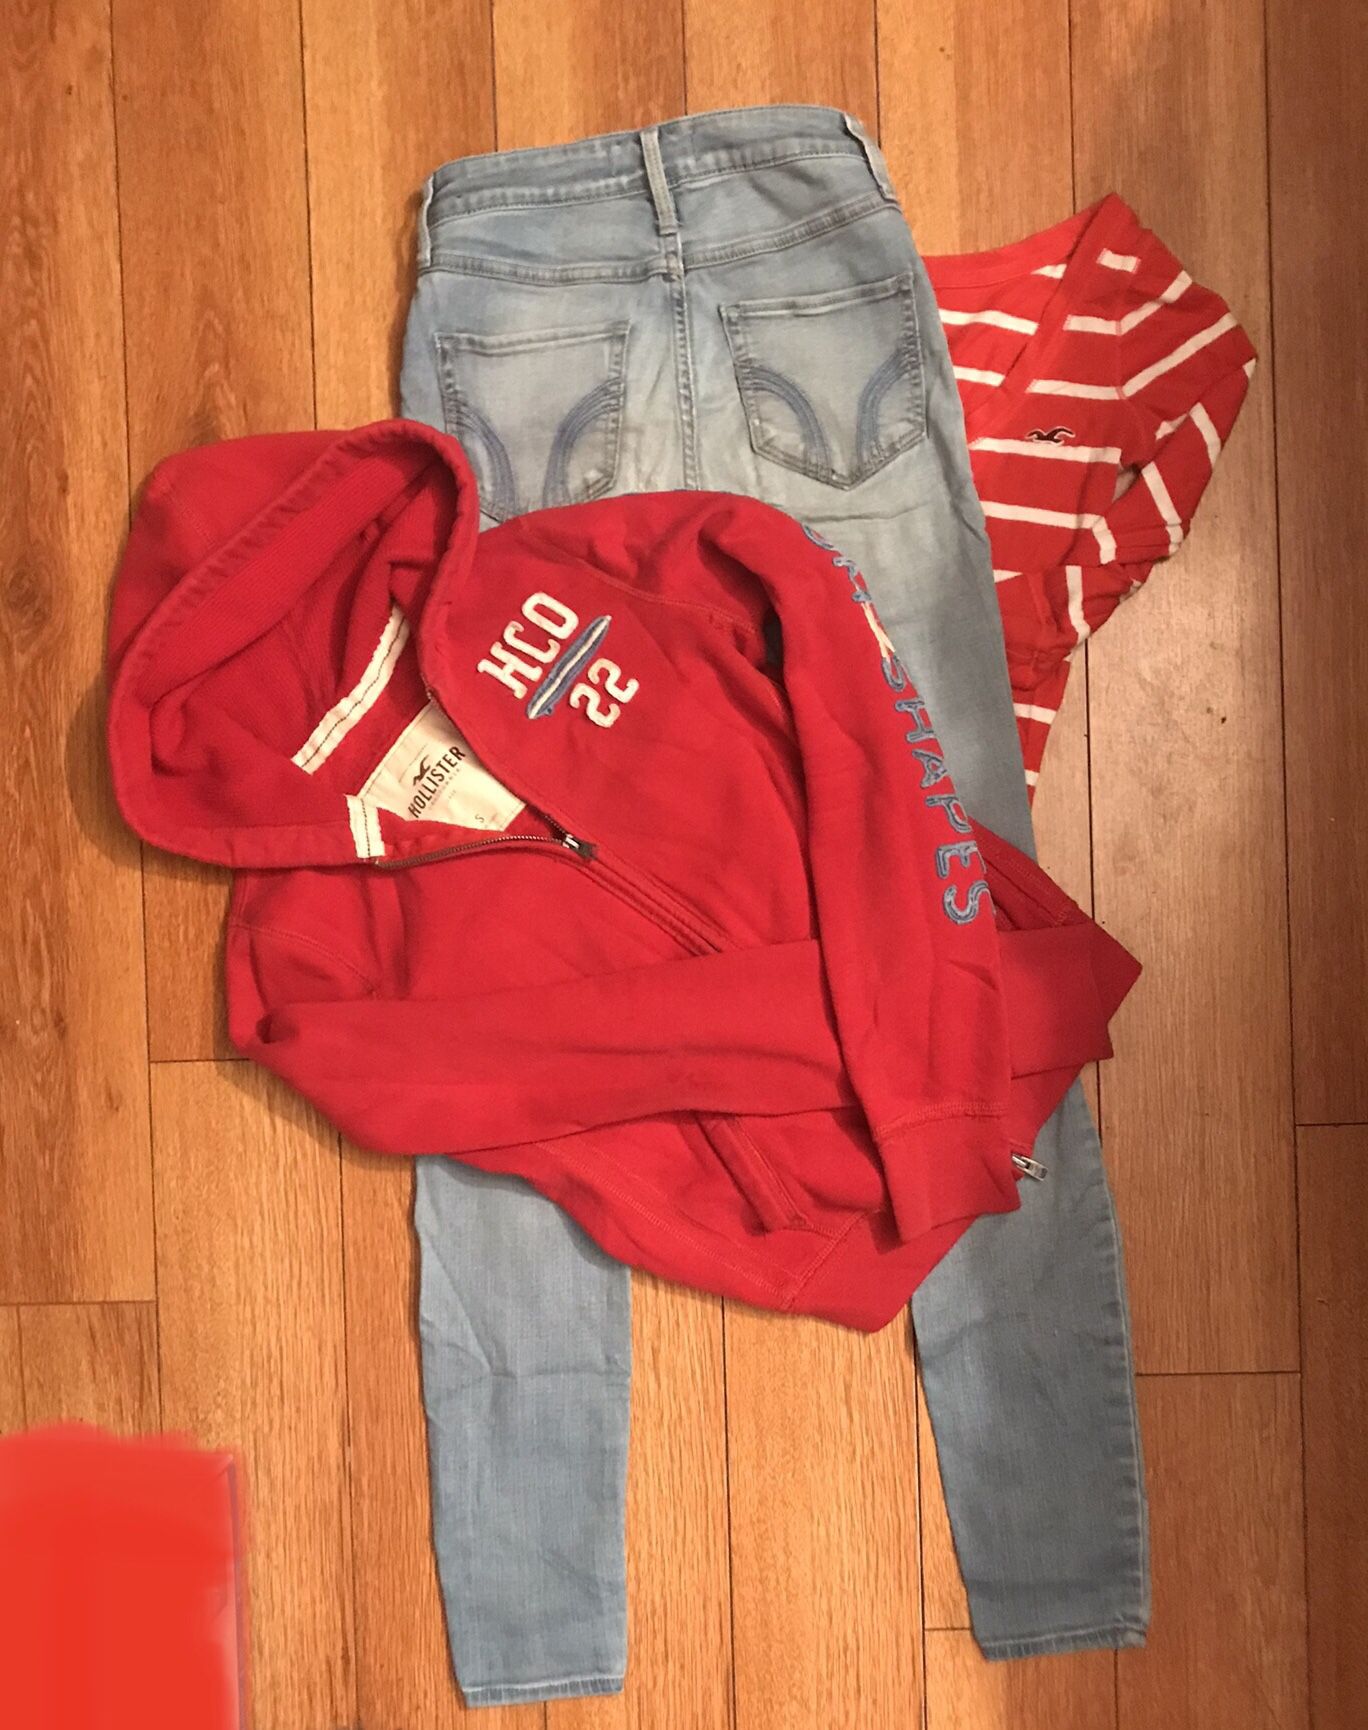 Hollister Clothes  Hoodie And Shirt Size S Pants Are Size 0R $28 for All